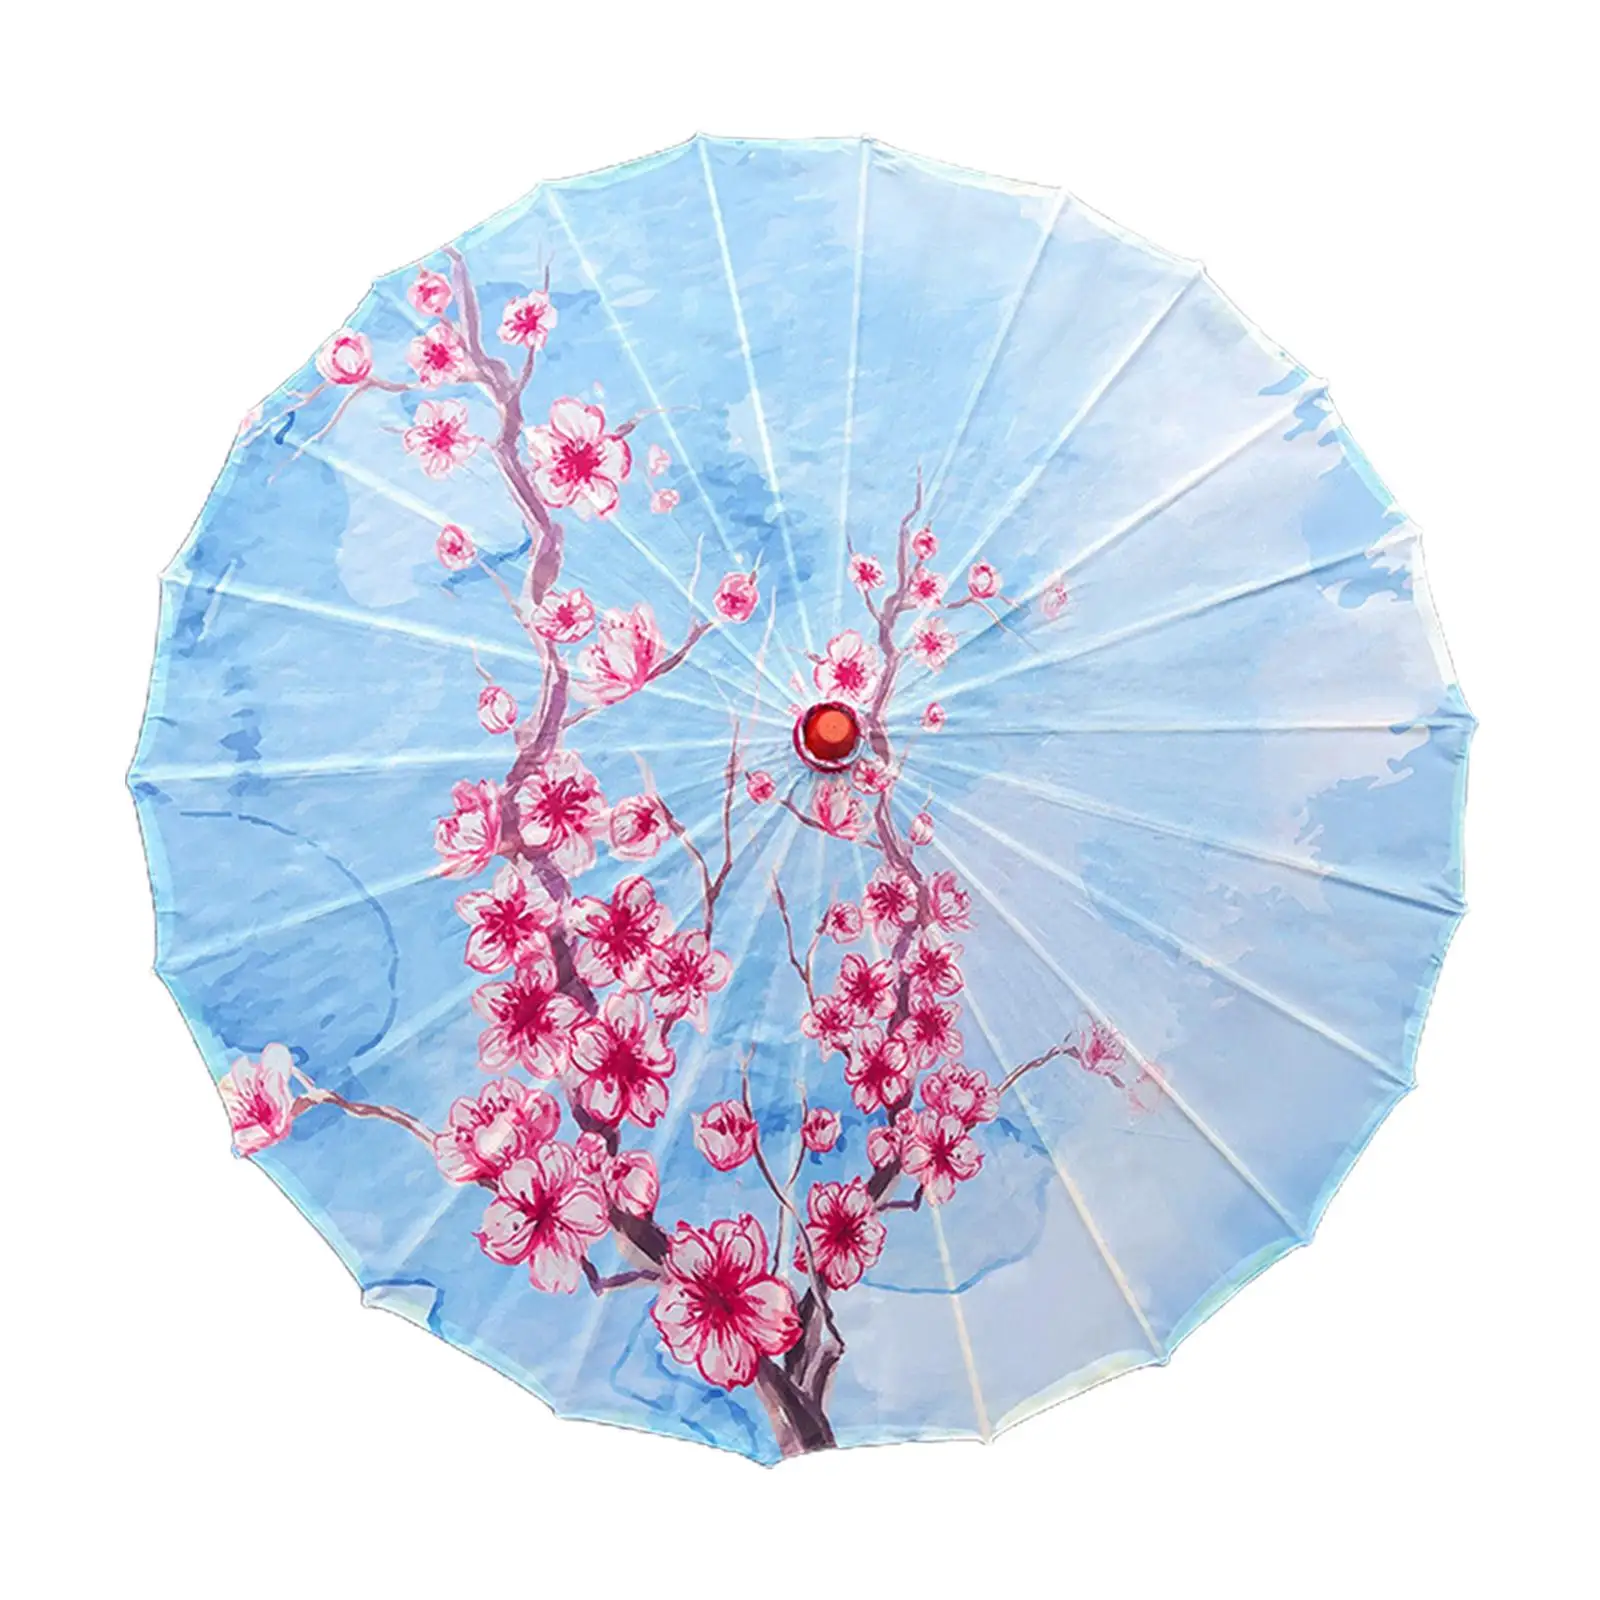 Ancient Dance Umbrella 32 inch Sunshade Rainproof Chinese Oiled Paper Umbrella for Costumes Decoration Events Wedding Party